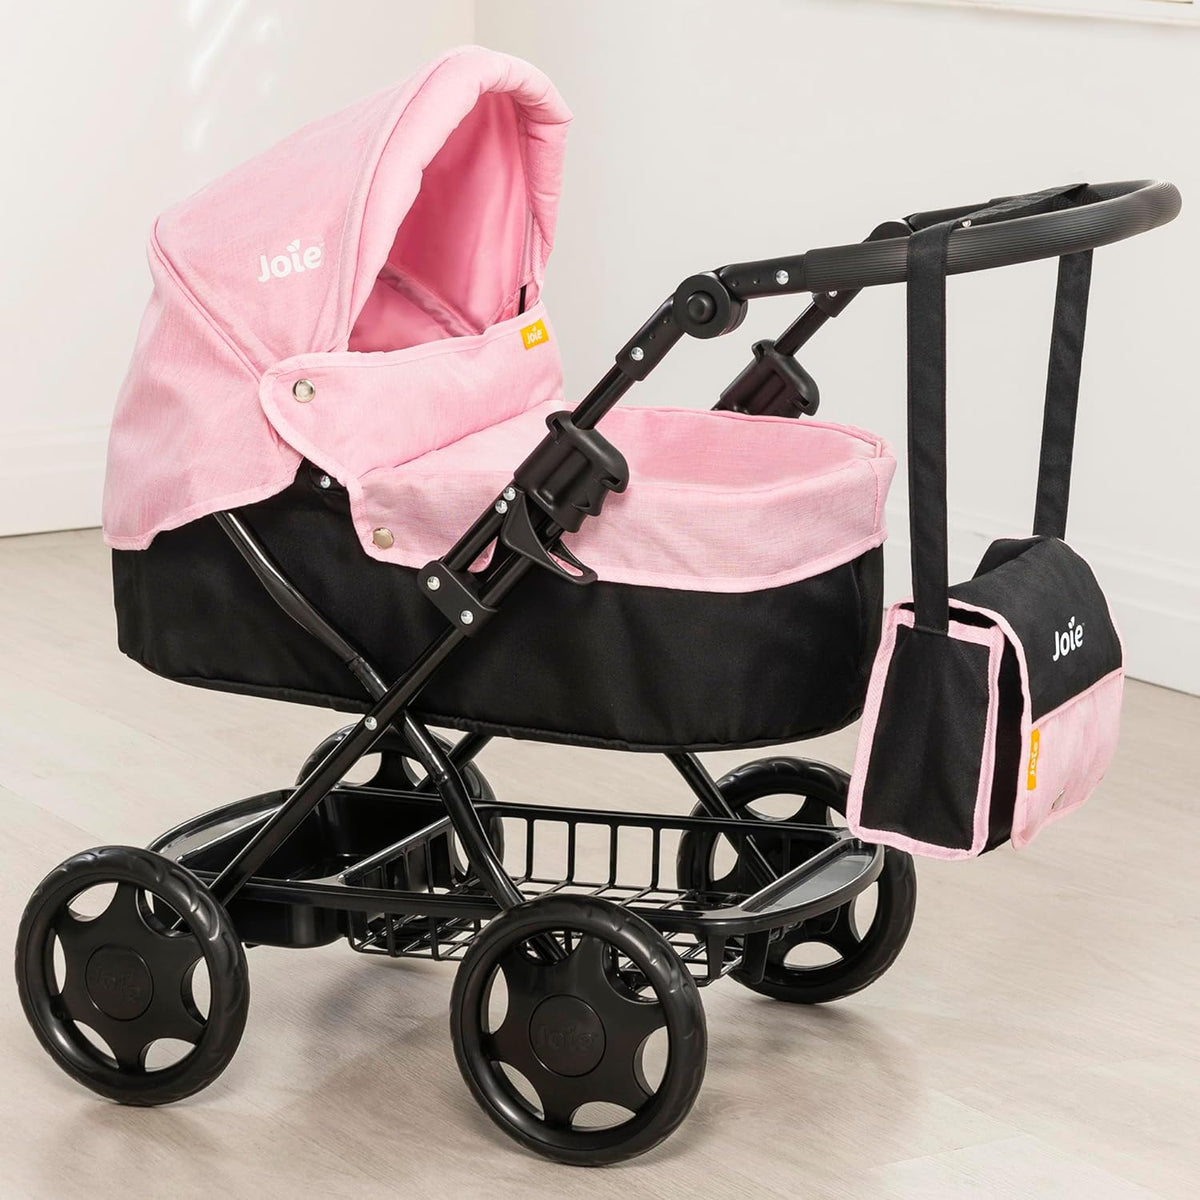 Joie Junior Classic Pram &amp; Parasol: Complete with matching bag, adjustable hood, under-seat storage. Toy pushchair for kids 3+.